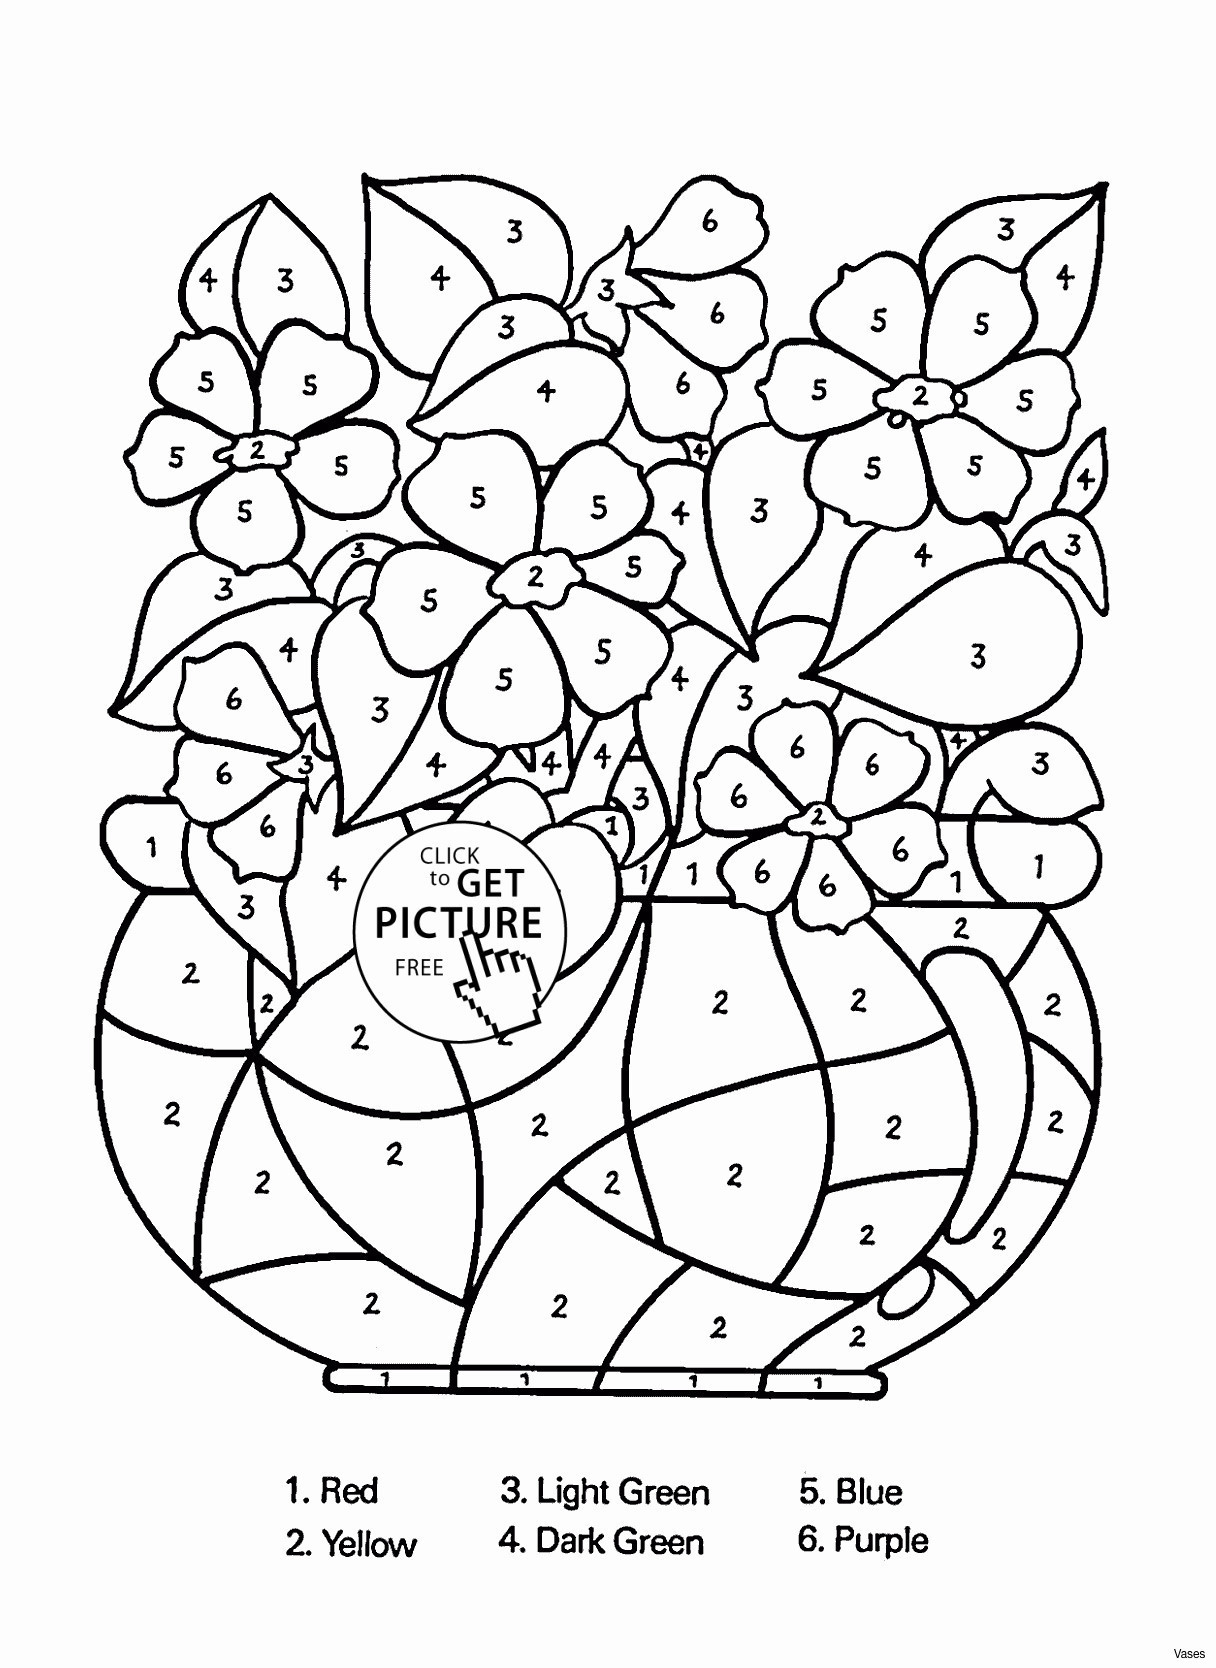 22 Awesome Floral Stones for Vases 2024 free download floral stones for vases of stock of blue and white vases vases artificial plants collection intended for blue and white vases pictures advanced coloring pages flowers 2019 vases flower vase 